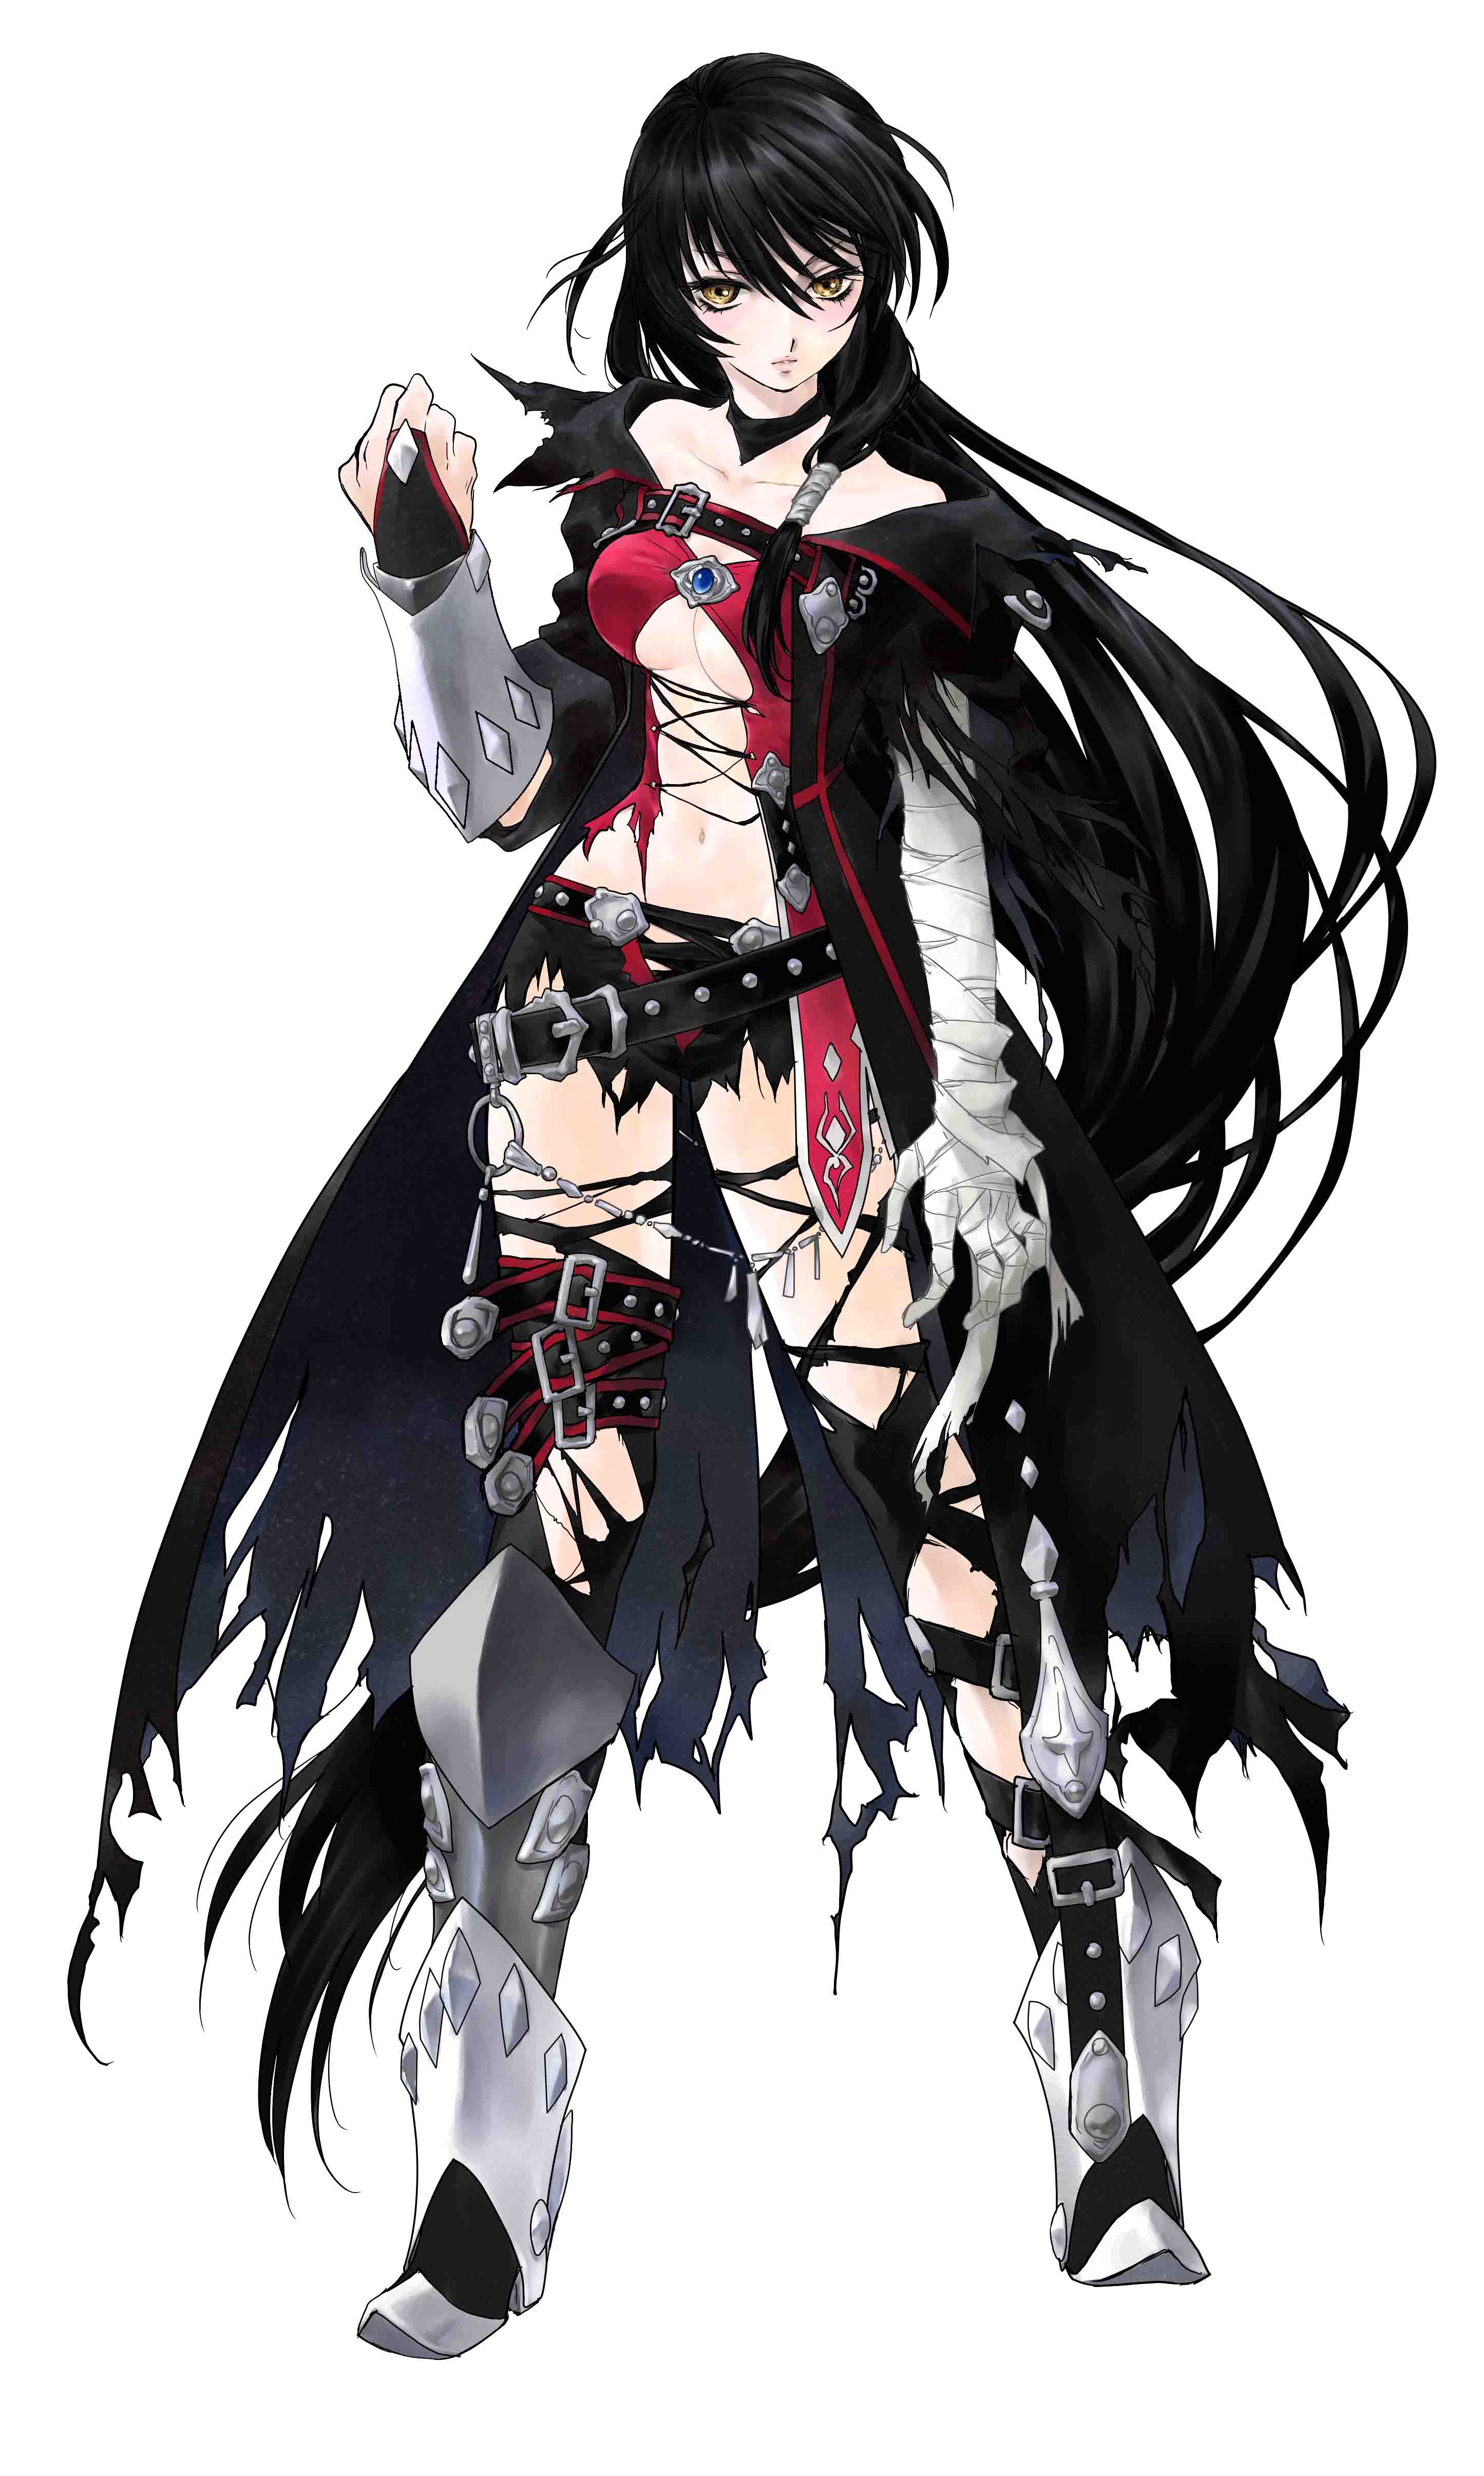 Tales Of Berseria Backgrounds, Compatible - PC, Mobile, Gadgets| 2890x4822 px